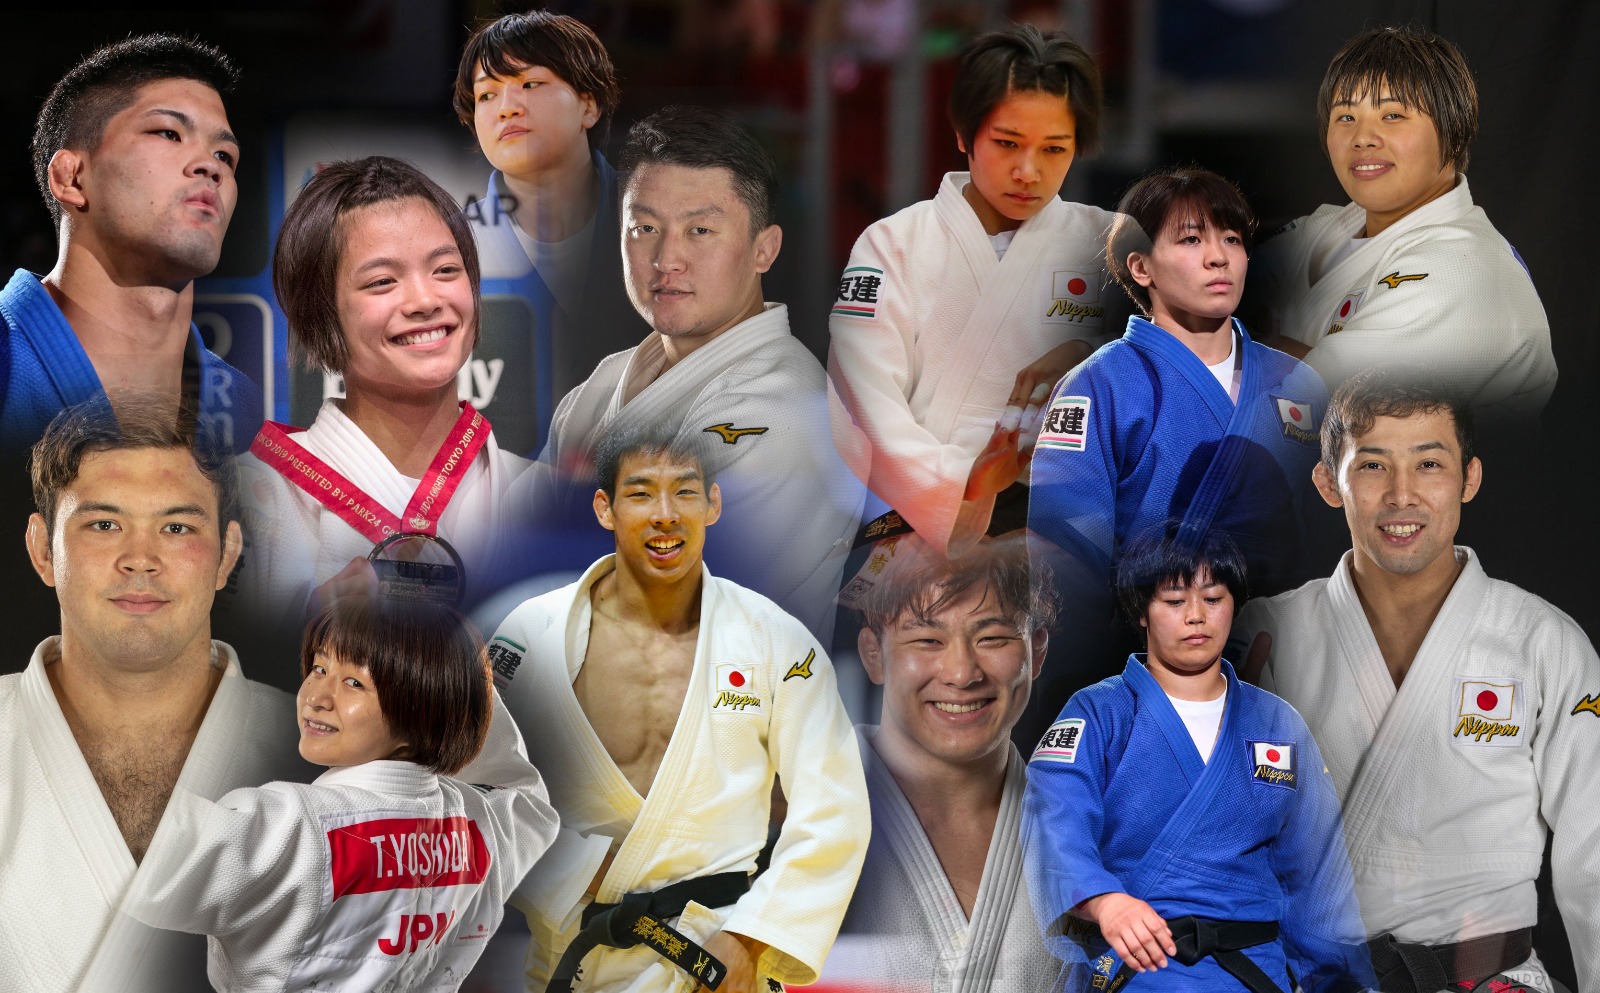 Japan unveils its Judo Olympic team